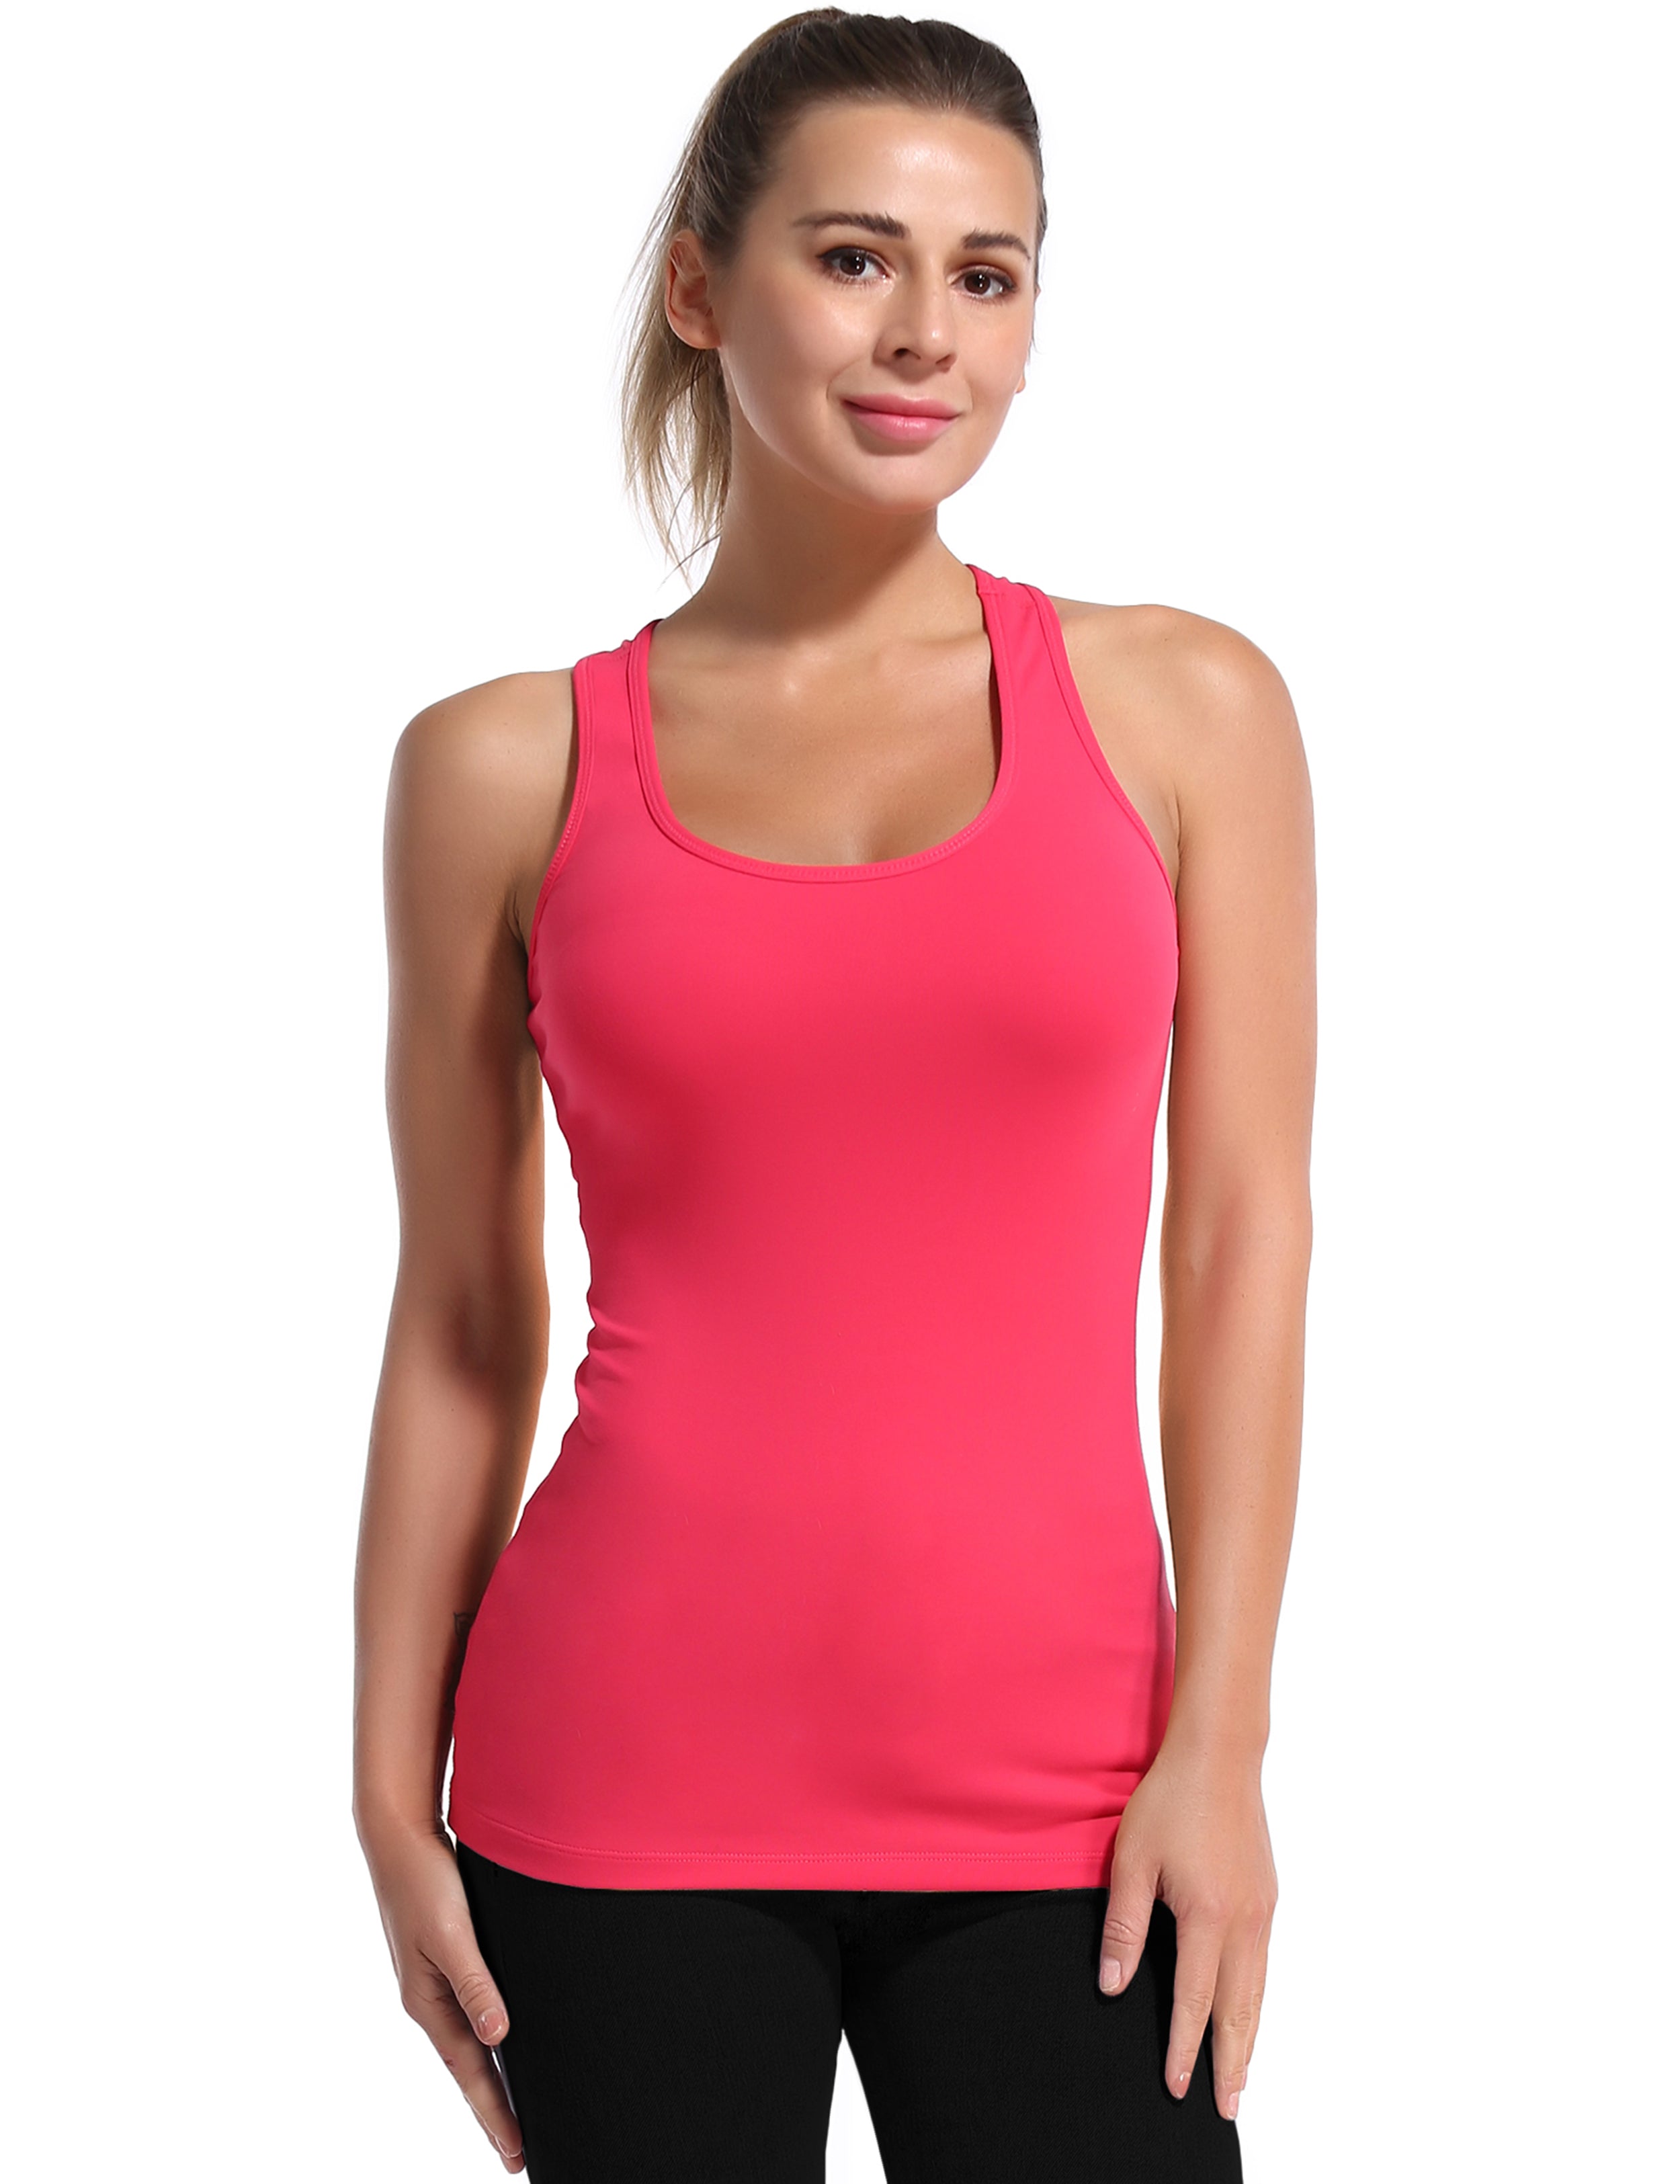 Racerback Athletic Tank Tops red 92%Nylon/8%Spandex(Cotton Soft) Designed for Jogging Tight Fit So buttery soft, it feels weightless Sweat-wicking Four-way stretch Breathable Contours your body Sits below the waistband for moderate, everyday coverage